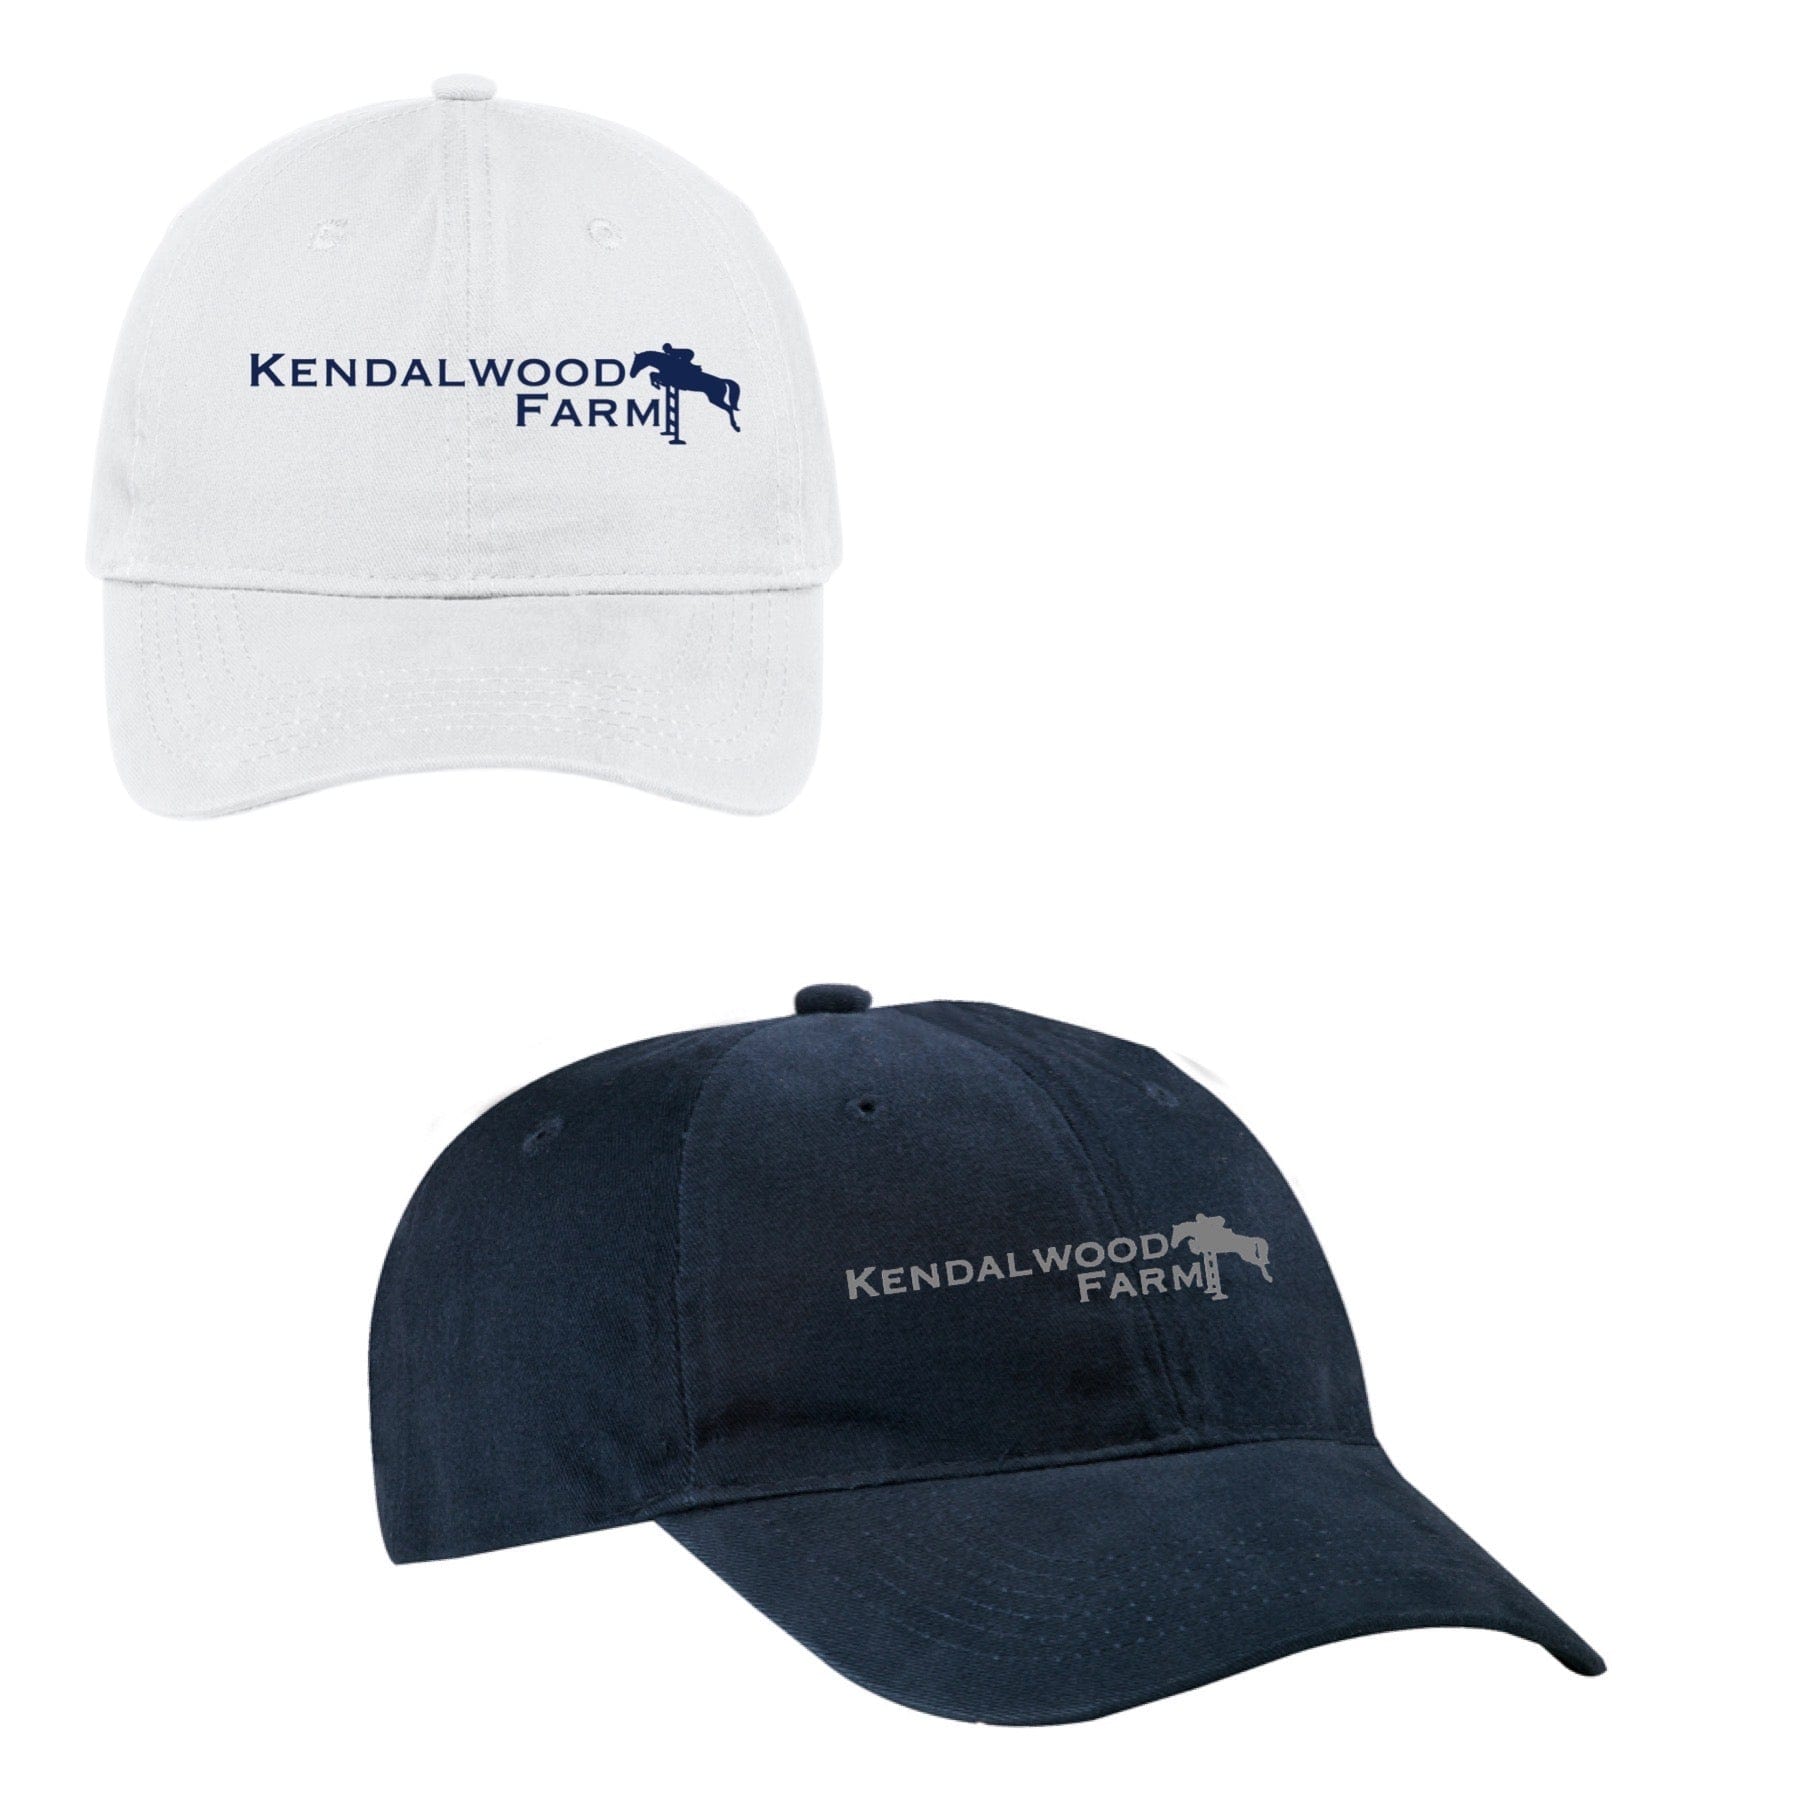 Equestrian Team Apparel Kendalwood Farm Baseball Cap equestrian team apparel online tack store mobile tack store custom farm apparel custom show stable clothing equestrian lifestyle horse show clothing riding clothes horses equestrian tack store